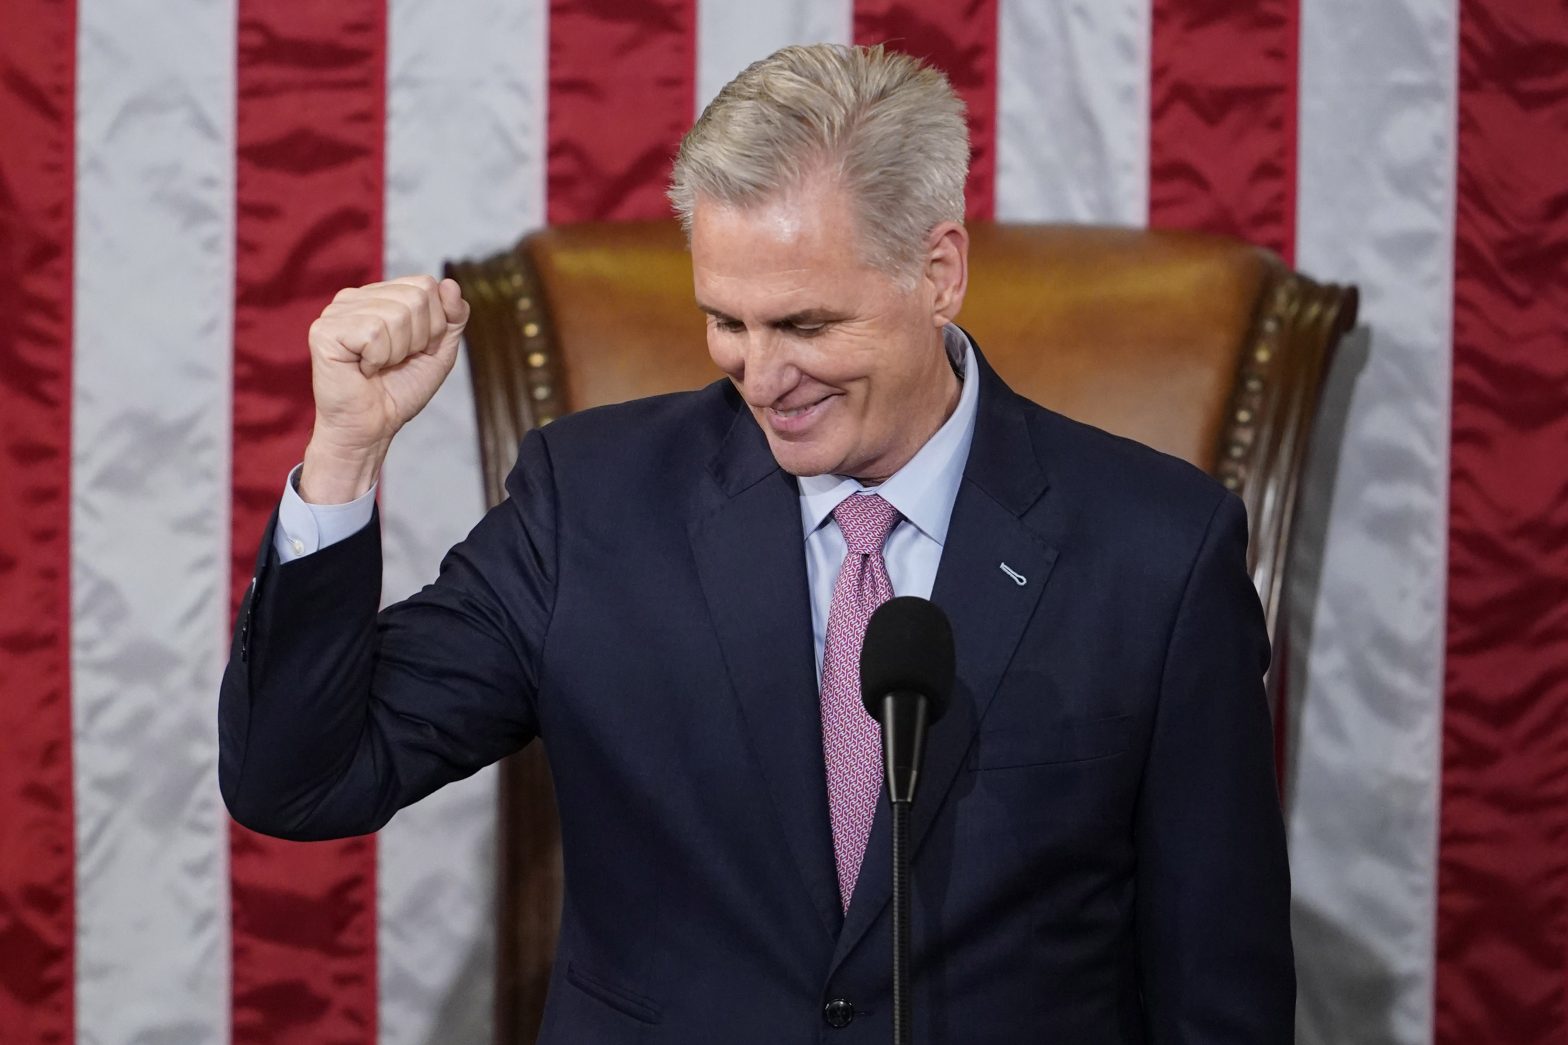 McCarthy Wins Speakership in Post-Midnight Session